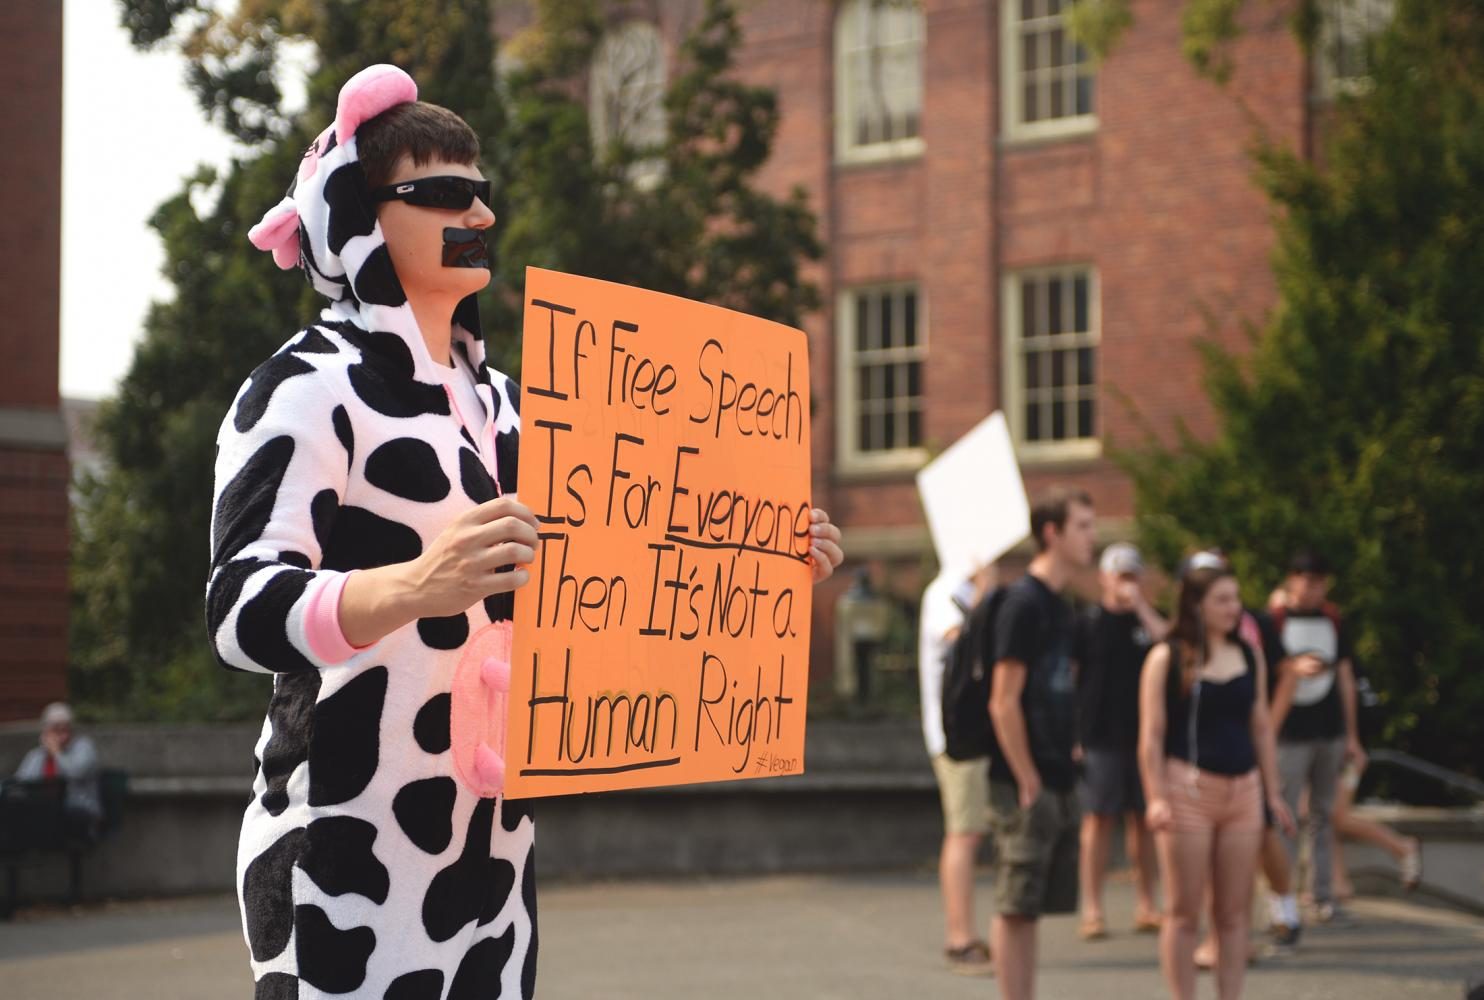 Sophomore+Matt+Molitor+dresses+in+a+cow+suit+to+advocate+for+animal+rights+and+veganism+Wednesday.